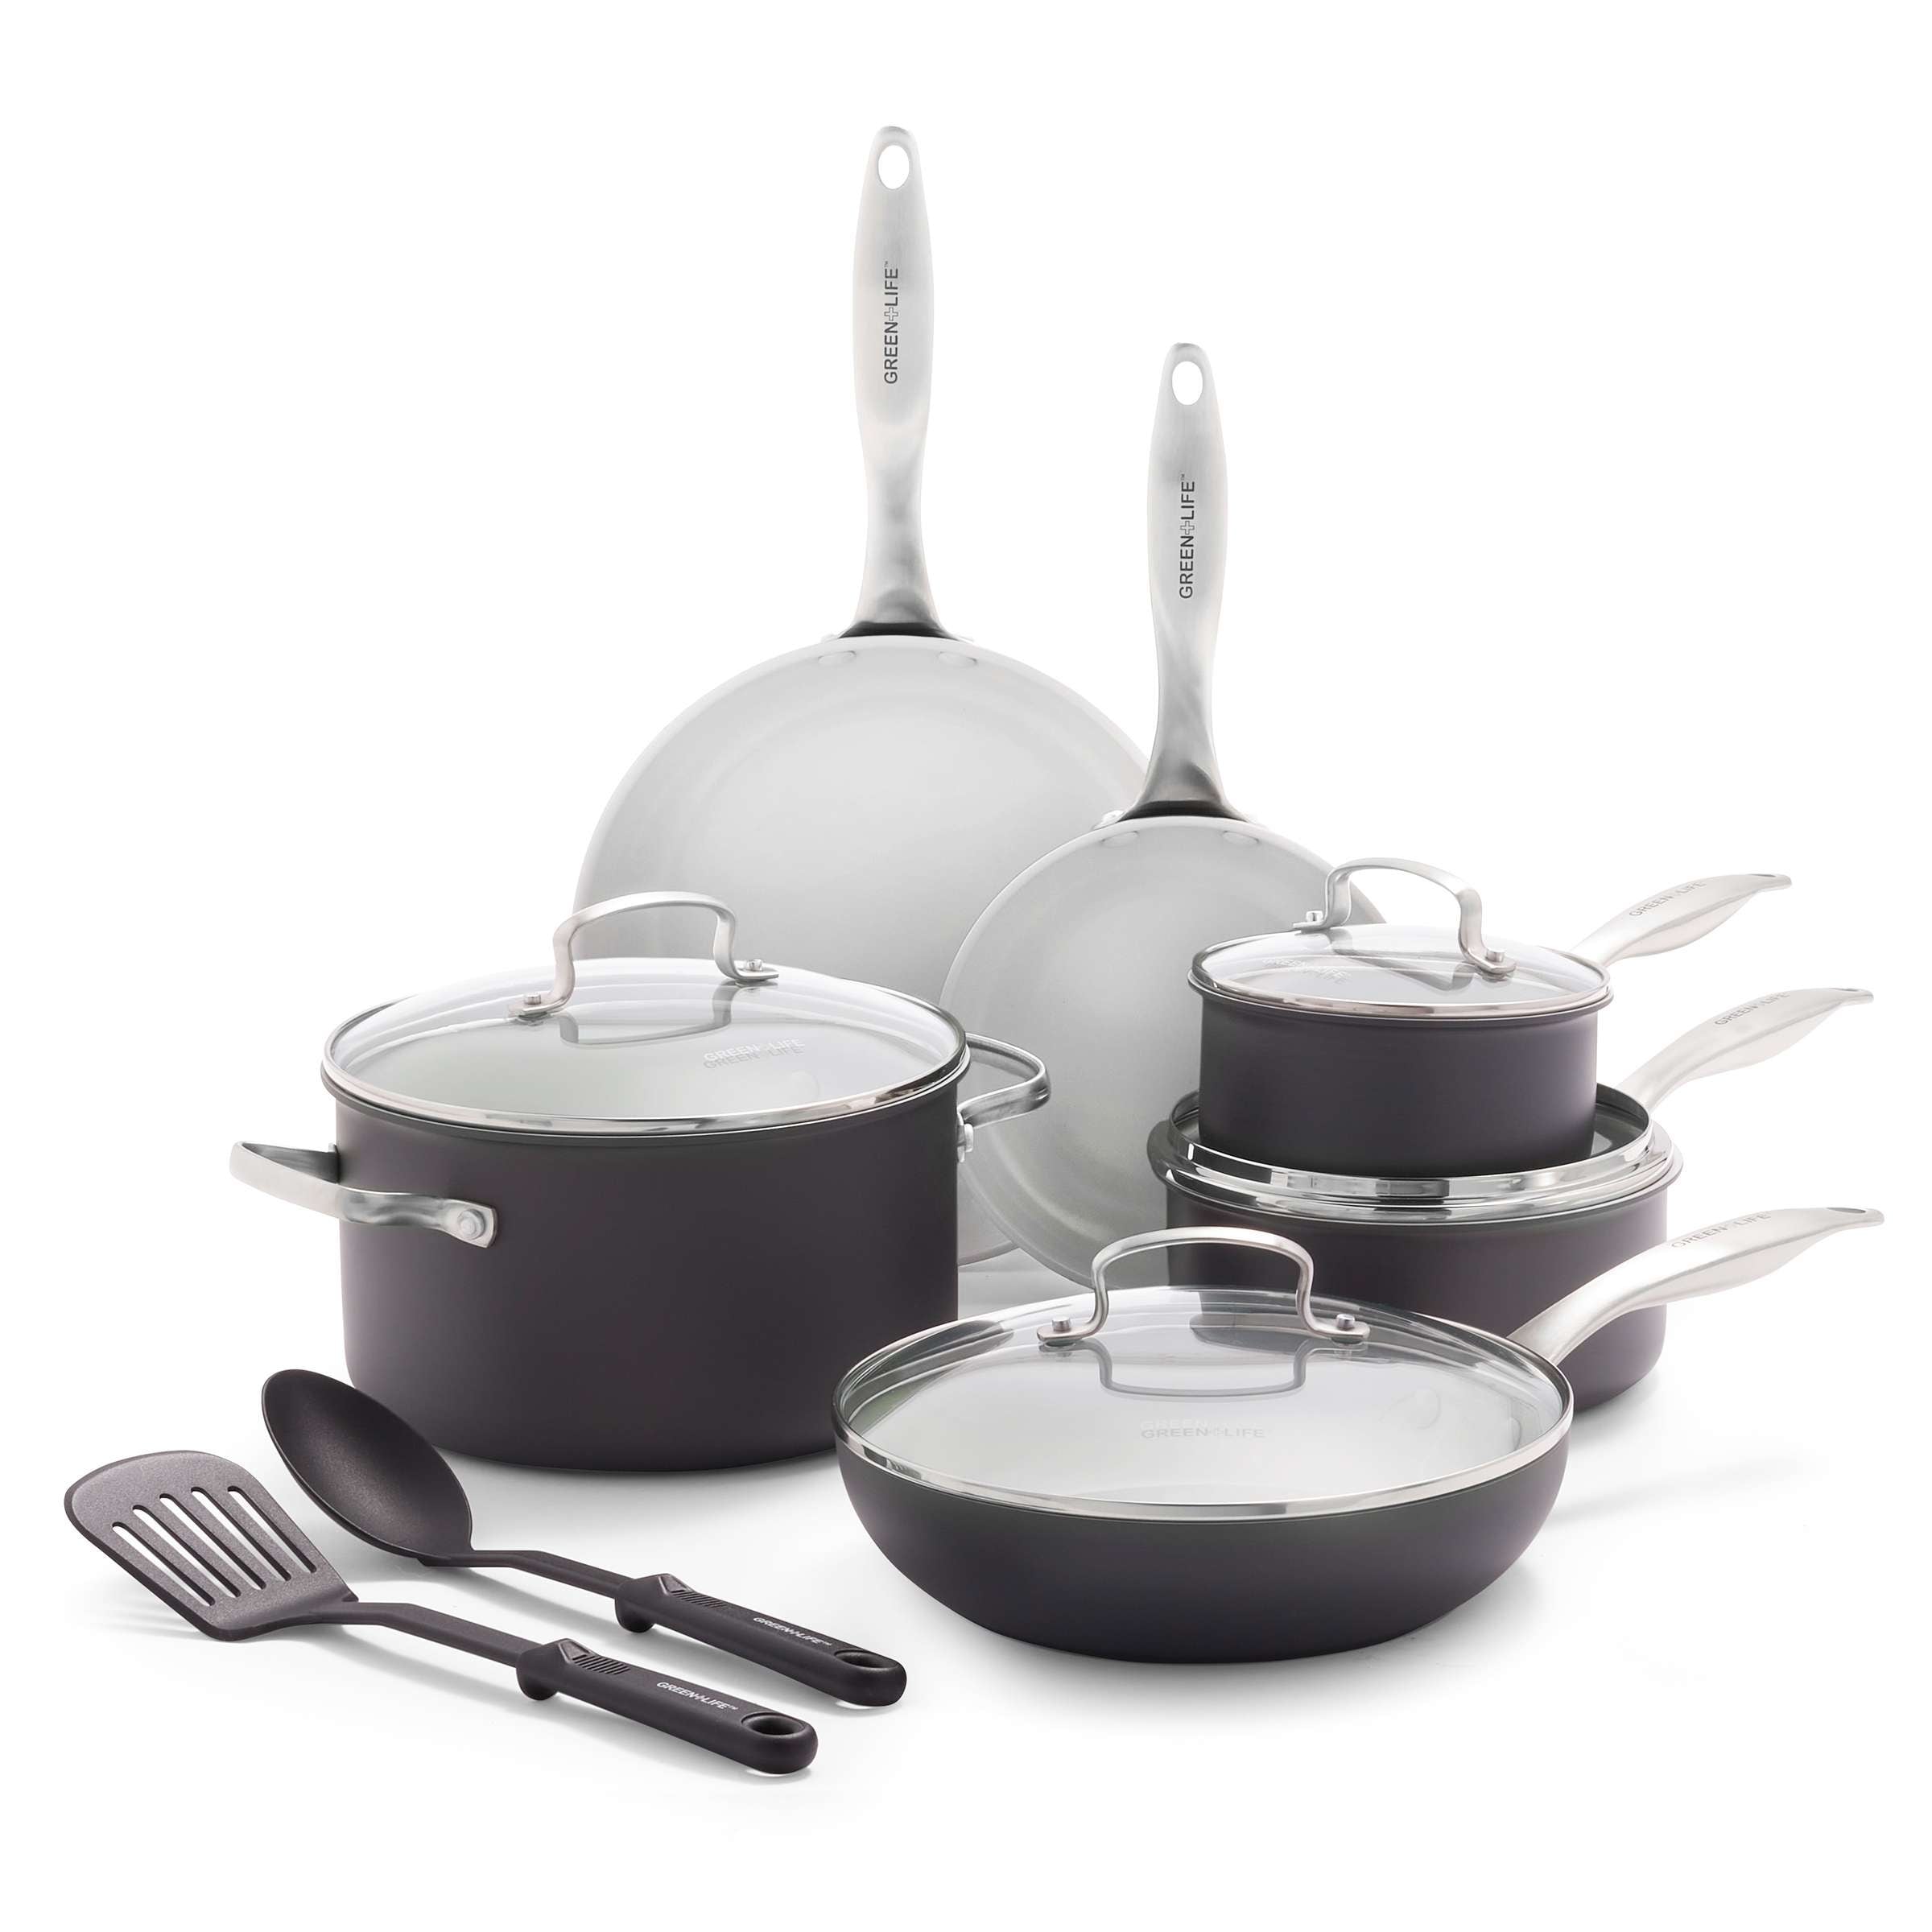 https://ak1.ostkcdn.com/images/products/is/images/direct/fa34cd41cdbfc5d44c07b87ed6e6ecd7780d2612/GreenLife-Classic-Pro-Ceramic-NonStick-12pc-Cookware-Set.jpg